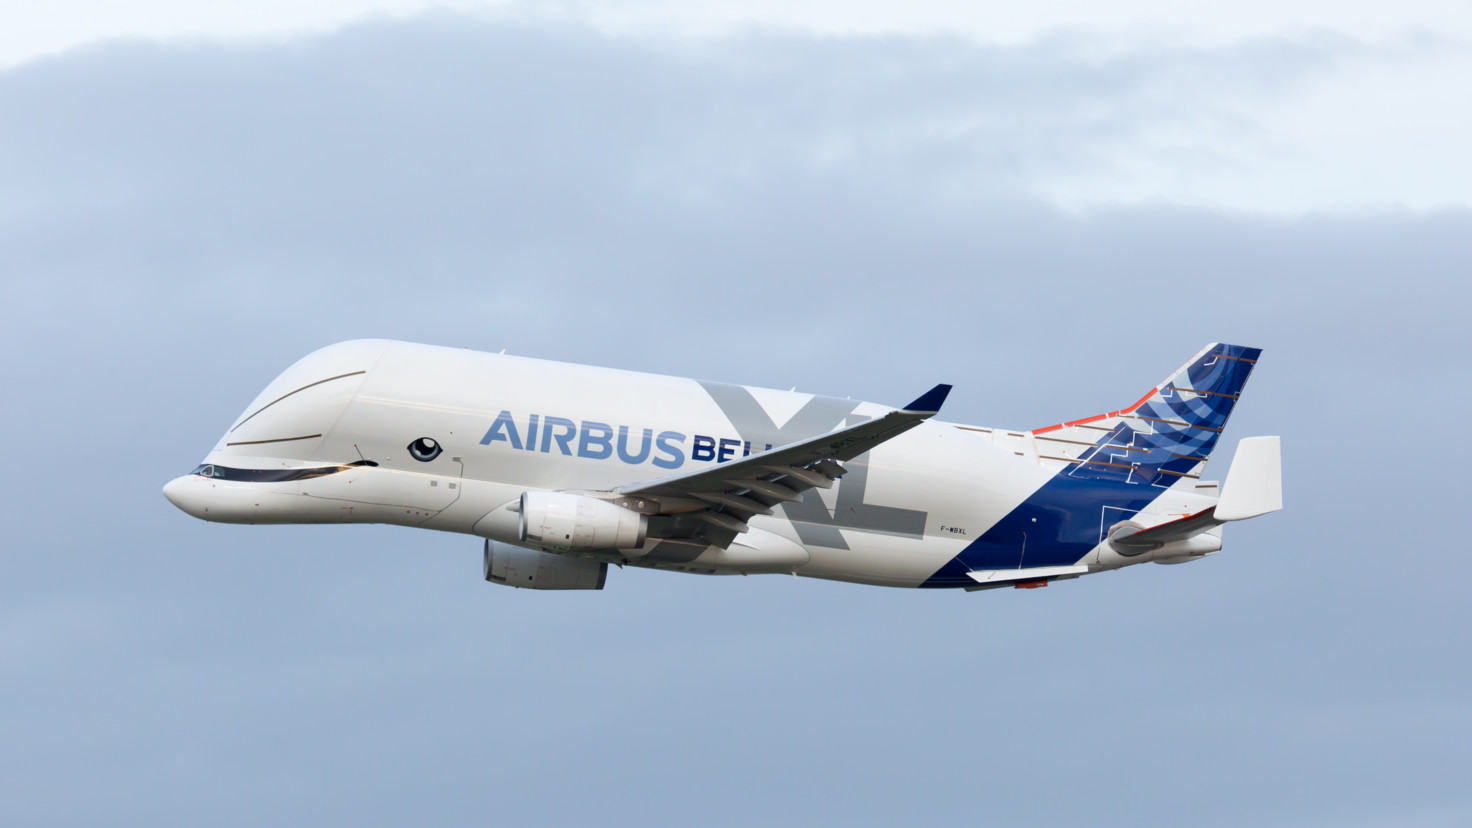 Airbus largest cargo aircraft receives approval from European authorities